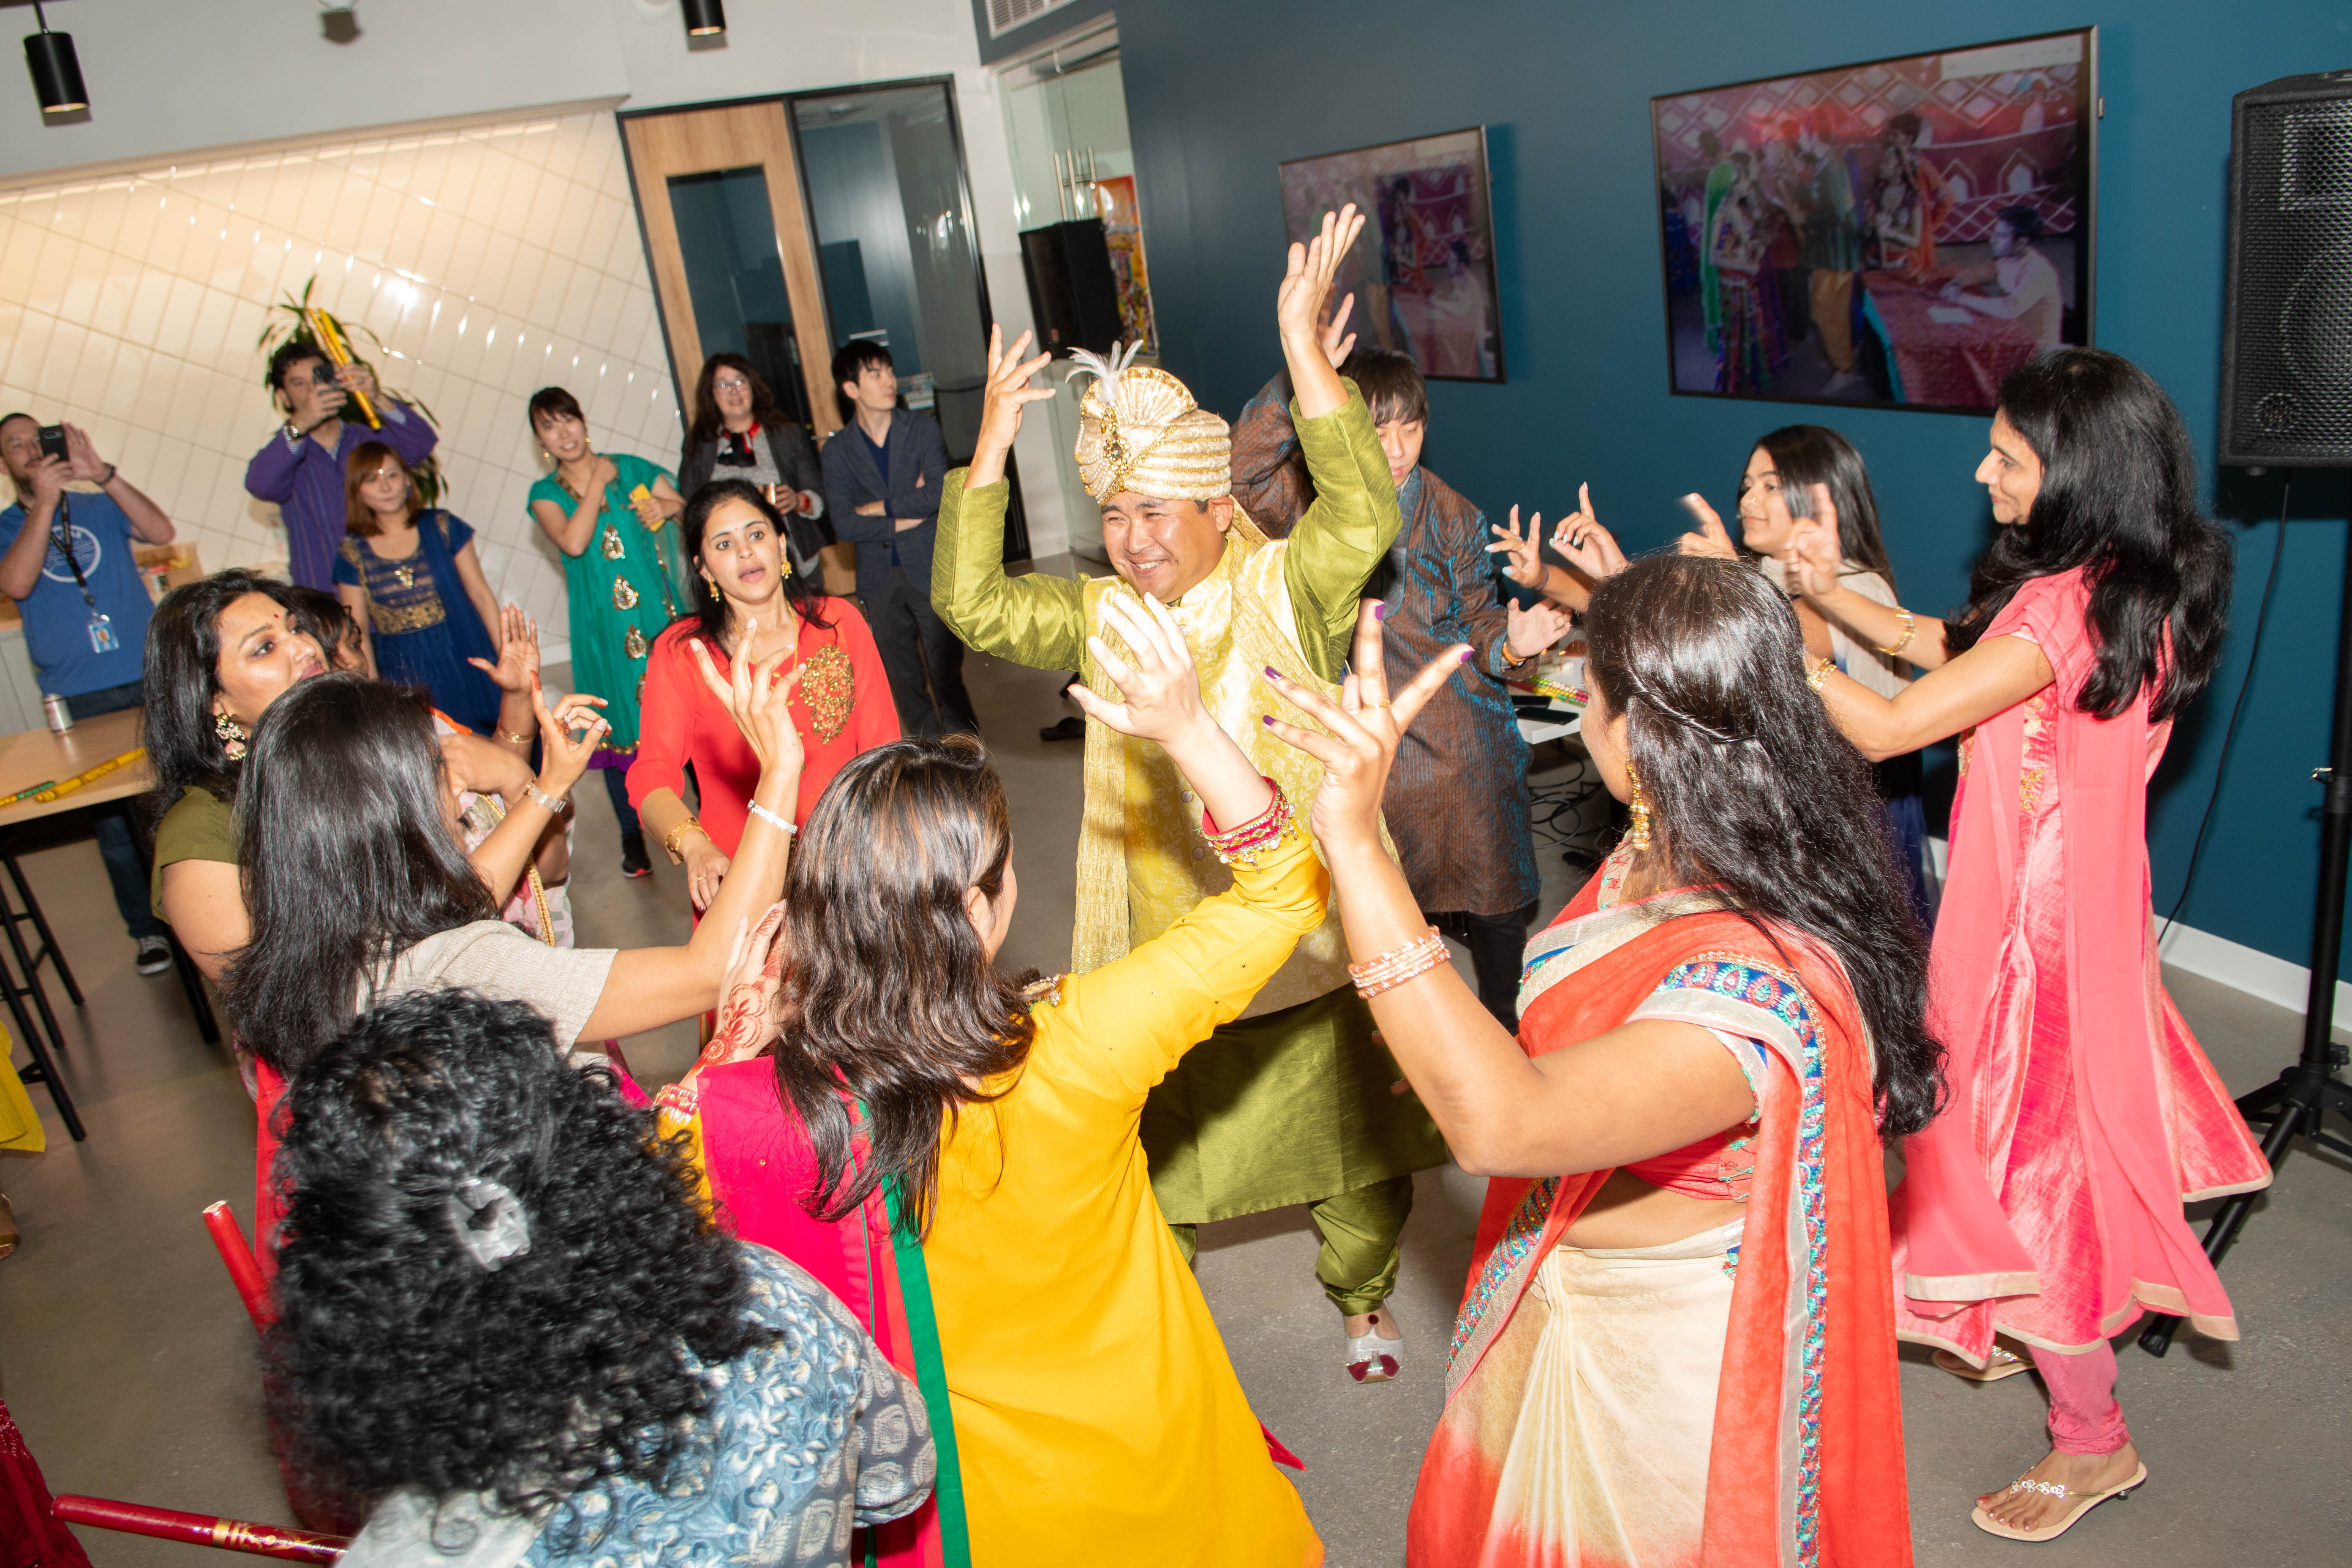 A group of people dancing indoors. They wear colorful clothing. This is part of a Diwali celebration.